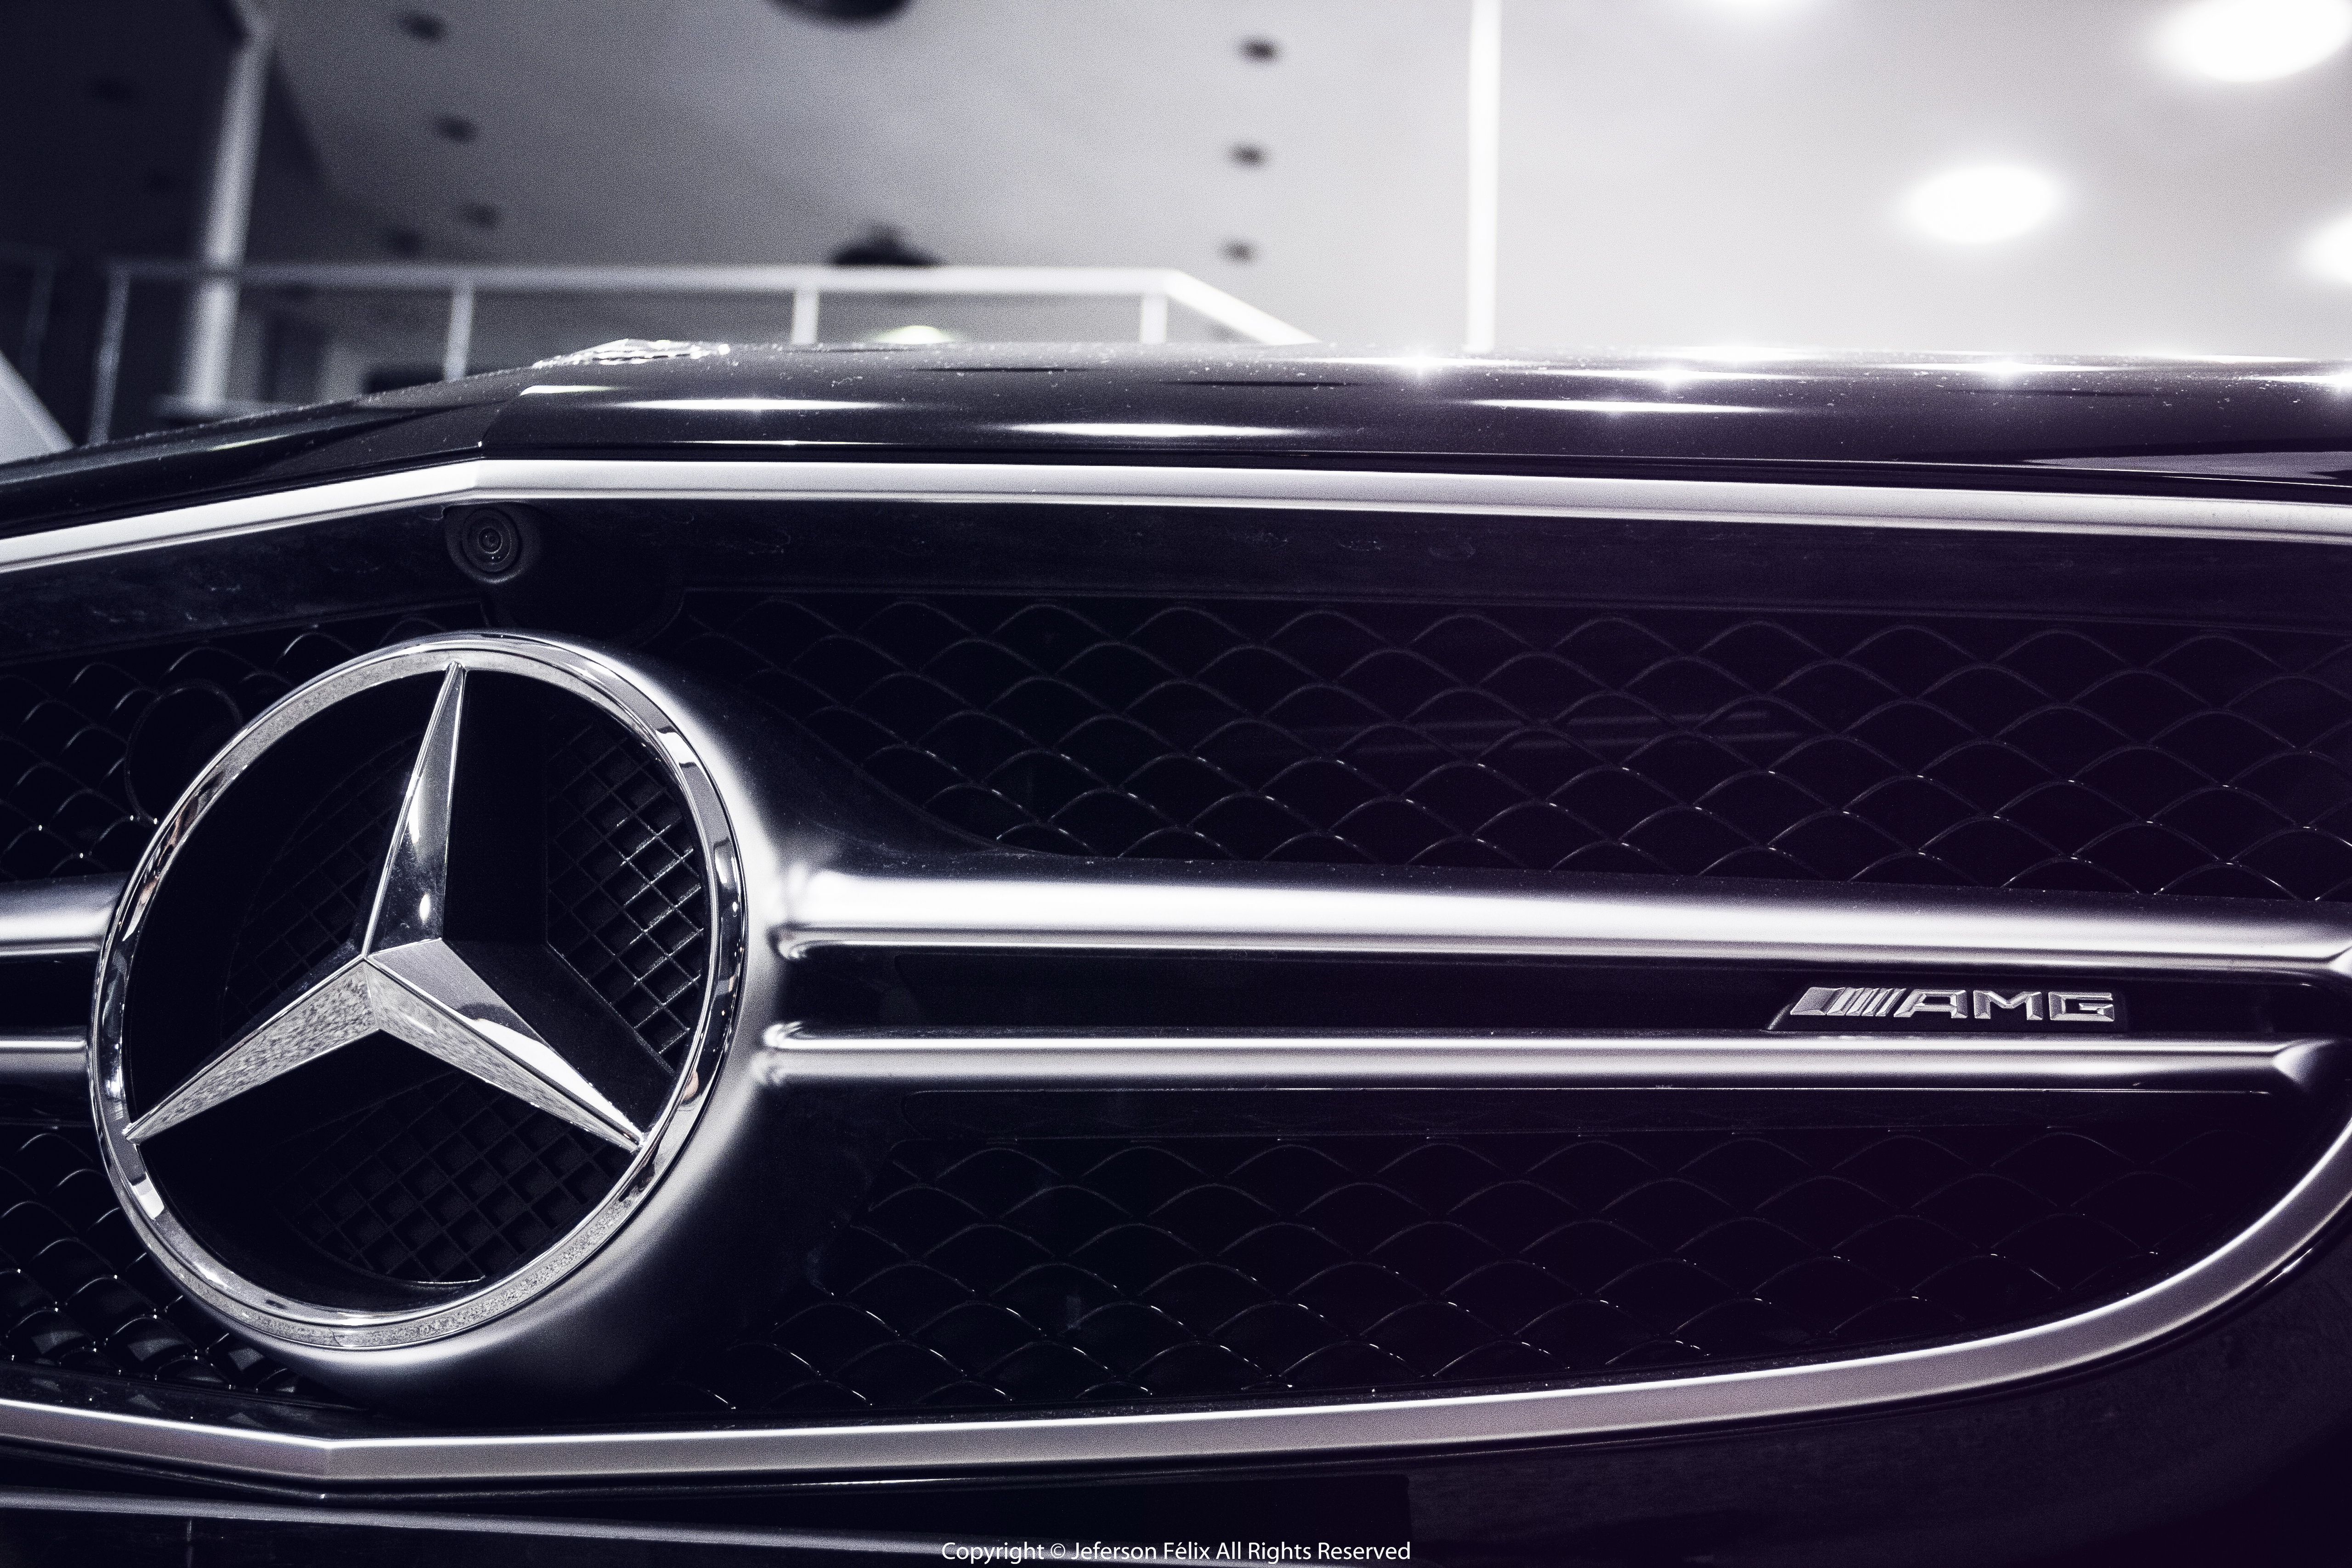 Download wallpapers Mercedes-Benz carbon logo, 4k, grunge art, carbon  background, creative, Mercedes-Benz black logo, cars brands, Mercedes-Benz  logo, Mercedes-Benz for desktop with resolution 3840x2400. High Quality HD  pictures wallpapers